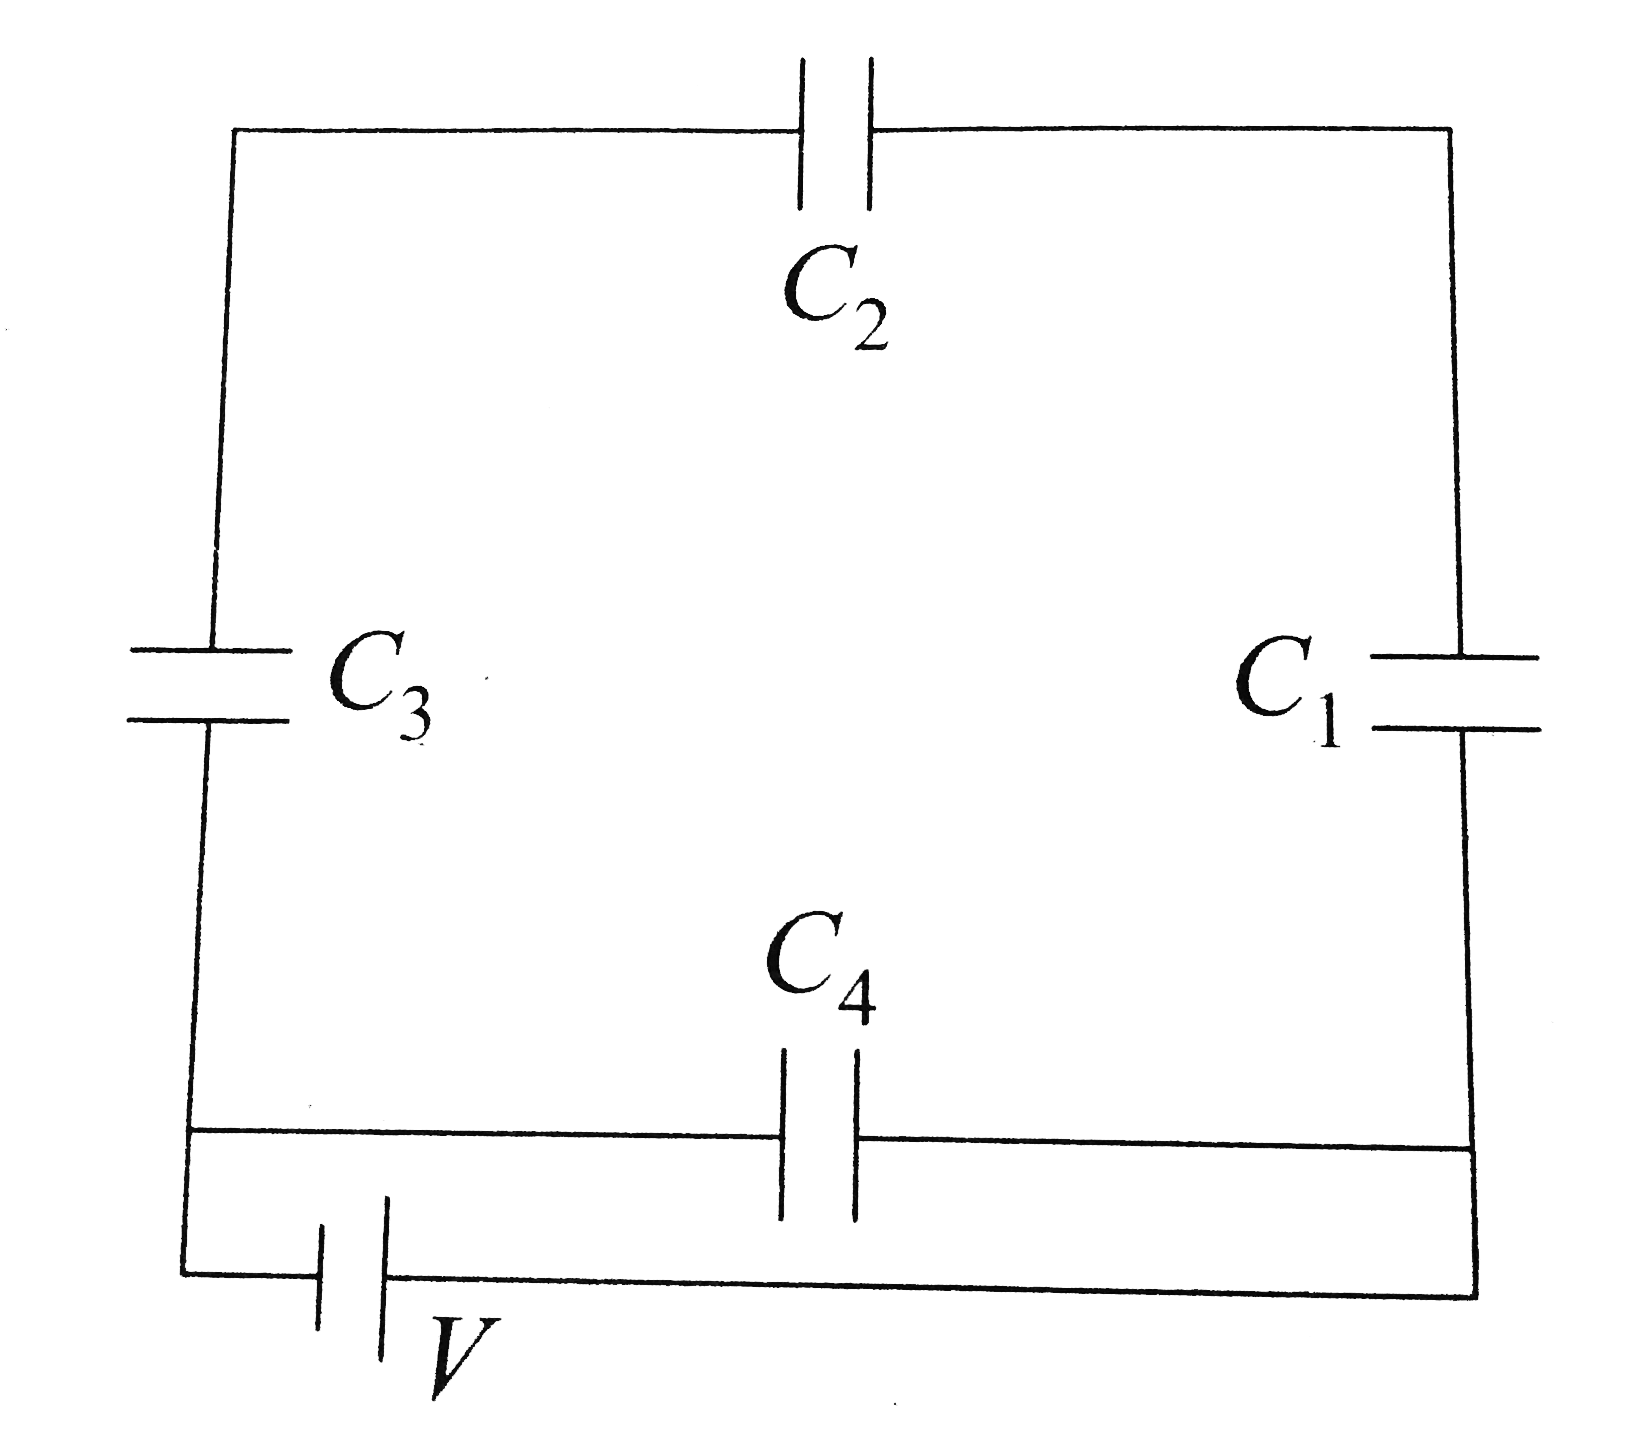 A network of four capacitors of capacity equal to C(1) = C, C(2) = 2C, C(3) = 3C and C(4) = 4C are connected to a battery as shown in the figure. The ratio of the charges on C(2) an C(4) is